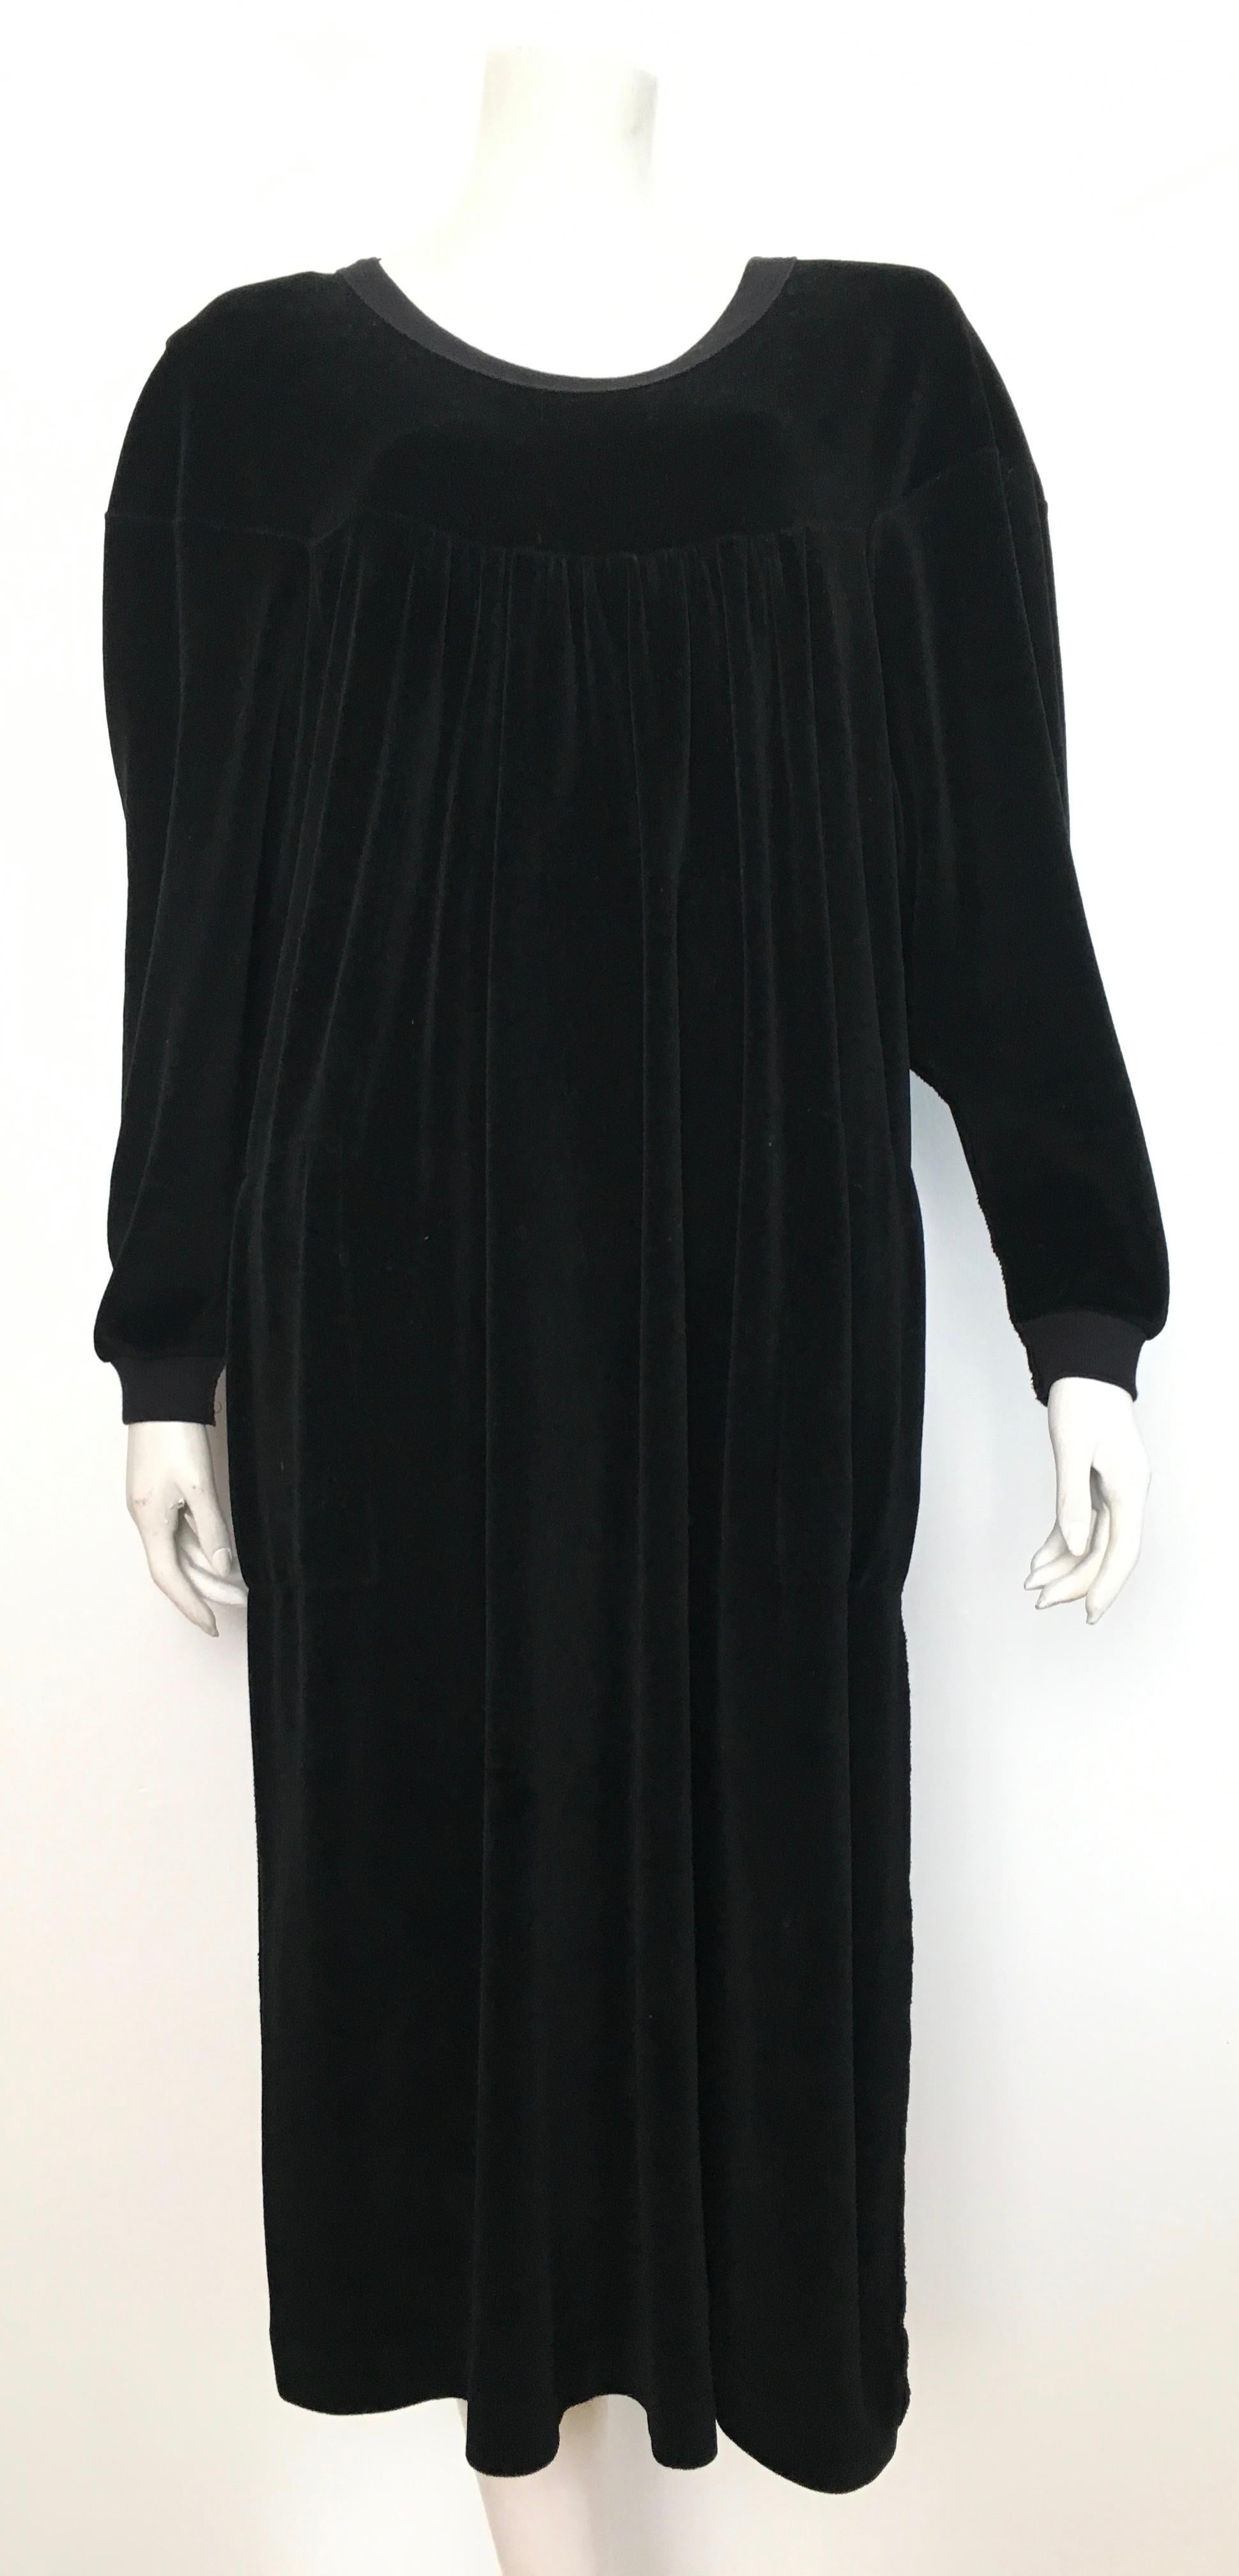 Sonia Rykiel 1980s Black Velour Dress with Pockets & Cardigan Size Large. For Sale 8